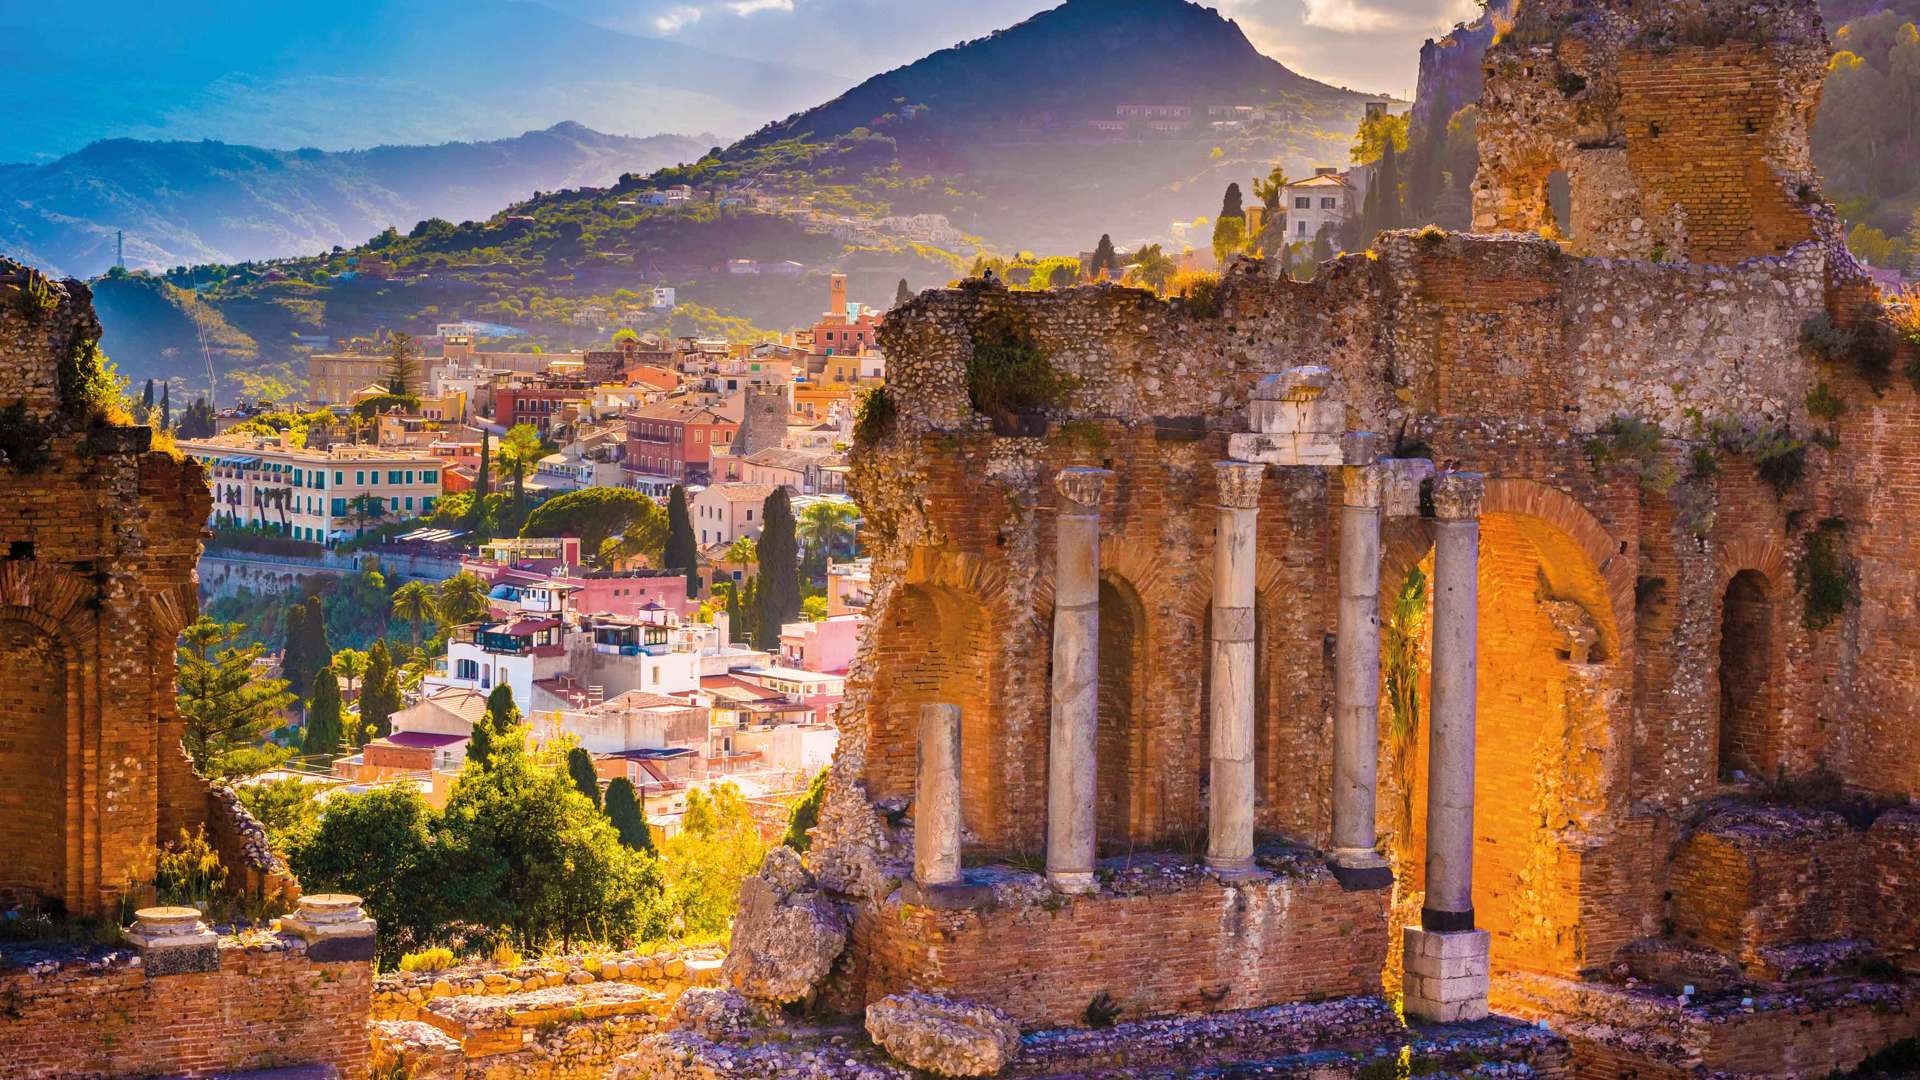 The Ruins Of Taormina Theater At Sunset, Sicily, Italy